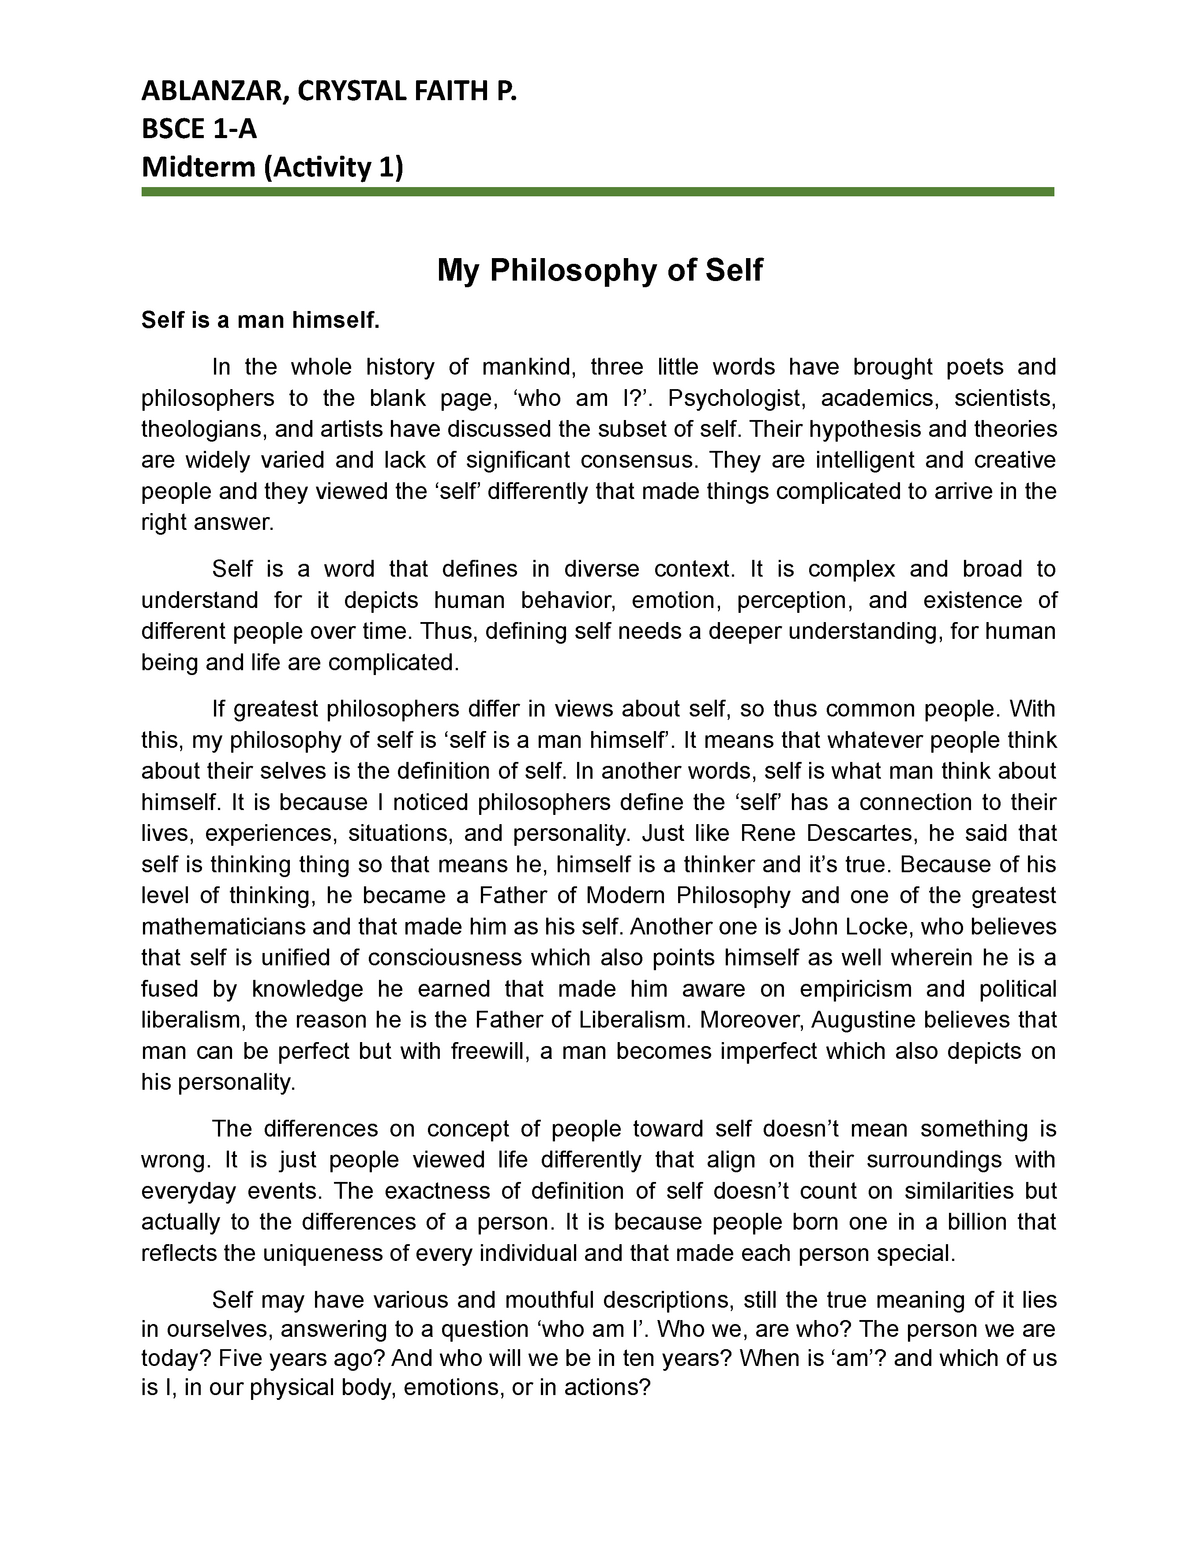 what is your own philosophy of self essay